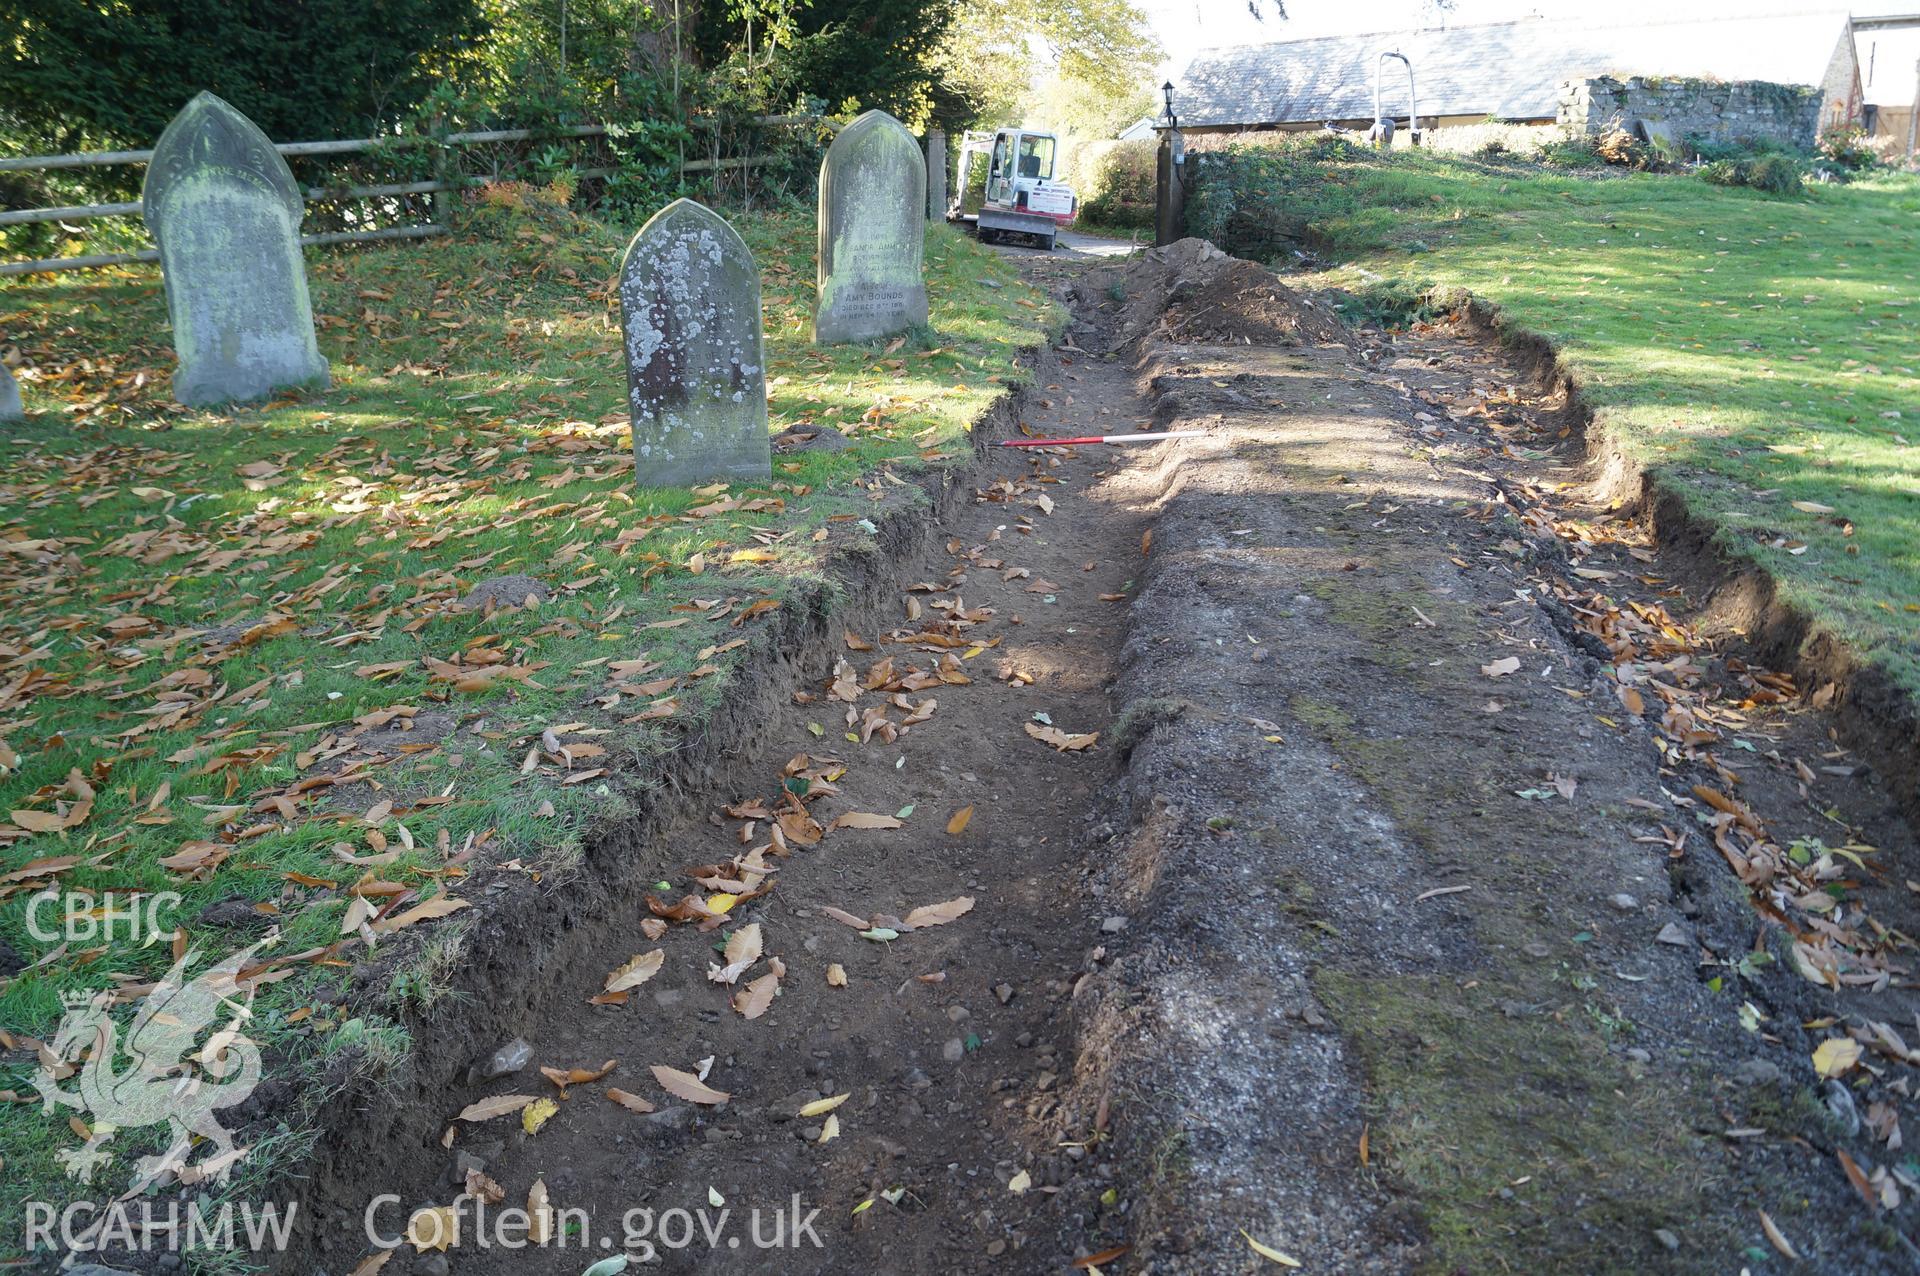 View 'looking west northwest at Trench B after cleaning, showing the central area of the pathway still retained' at St. Mary's, Gladestry, Powys. Photograph & description by Jenny Hall and Paul Sambrook of Trysor, 16th October 2017.